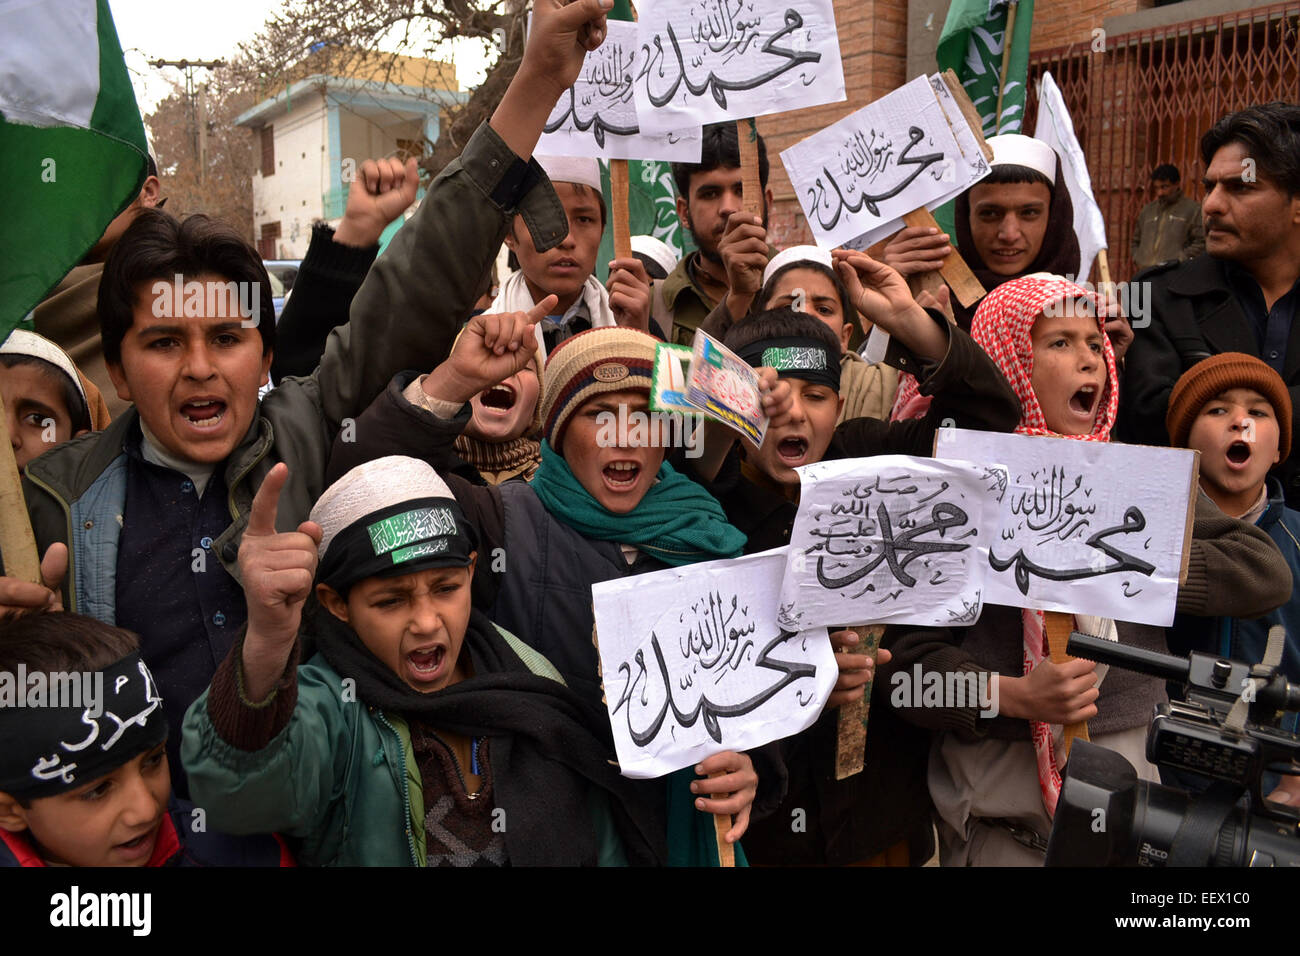 Quetta. 22nd Jan, 2015. Pakistani Islamists shout slogans during a protest against the printing of satirical sketches of the Prophet Mohammad by French magazine Charlie Hebdo in southwest Pakistan's Quetta on Jan. 22, 2015. Pakistan strongly condemned the publication of blasphemous caricatures in a French magazine, which triggered widespread protests across the Islamic world including Pakistan. Credit:  Asad/Xinhua/Alamy Live News Stock Photo